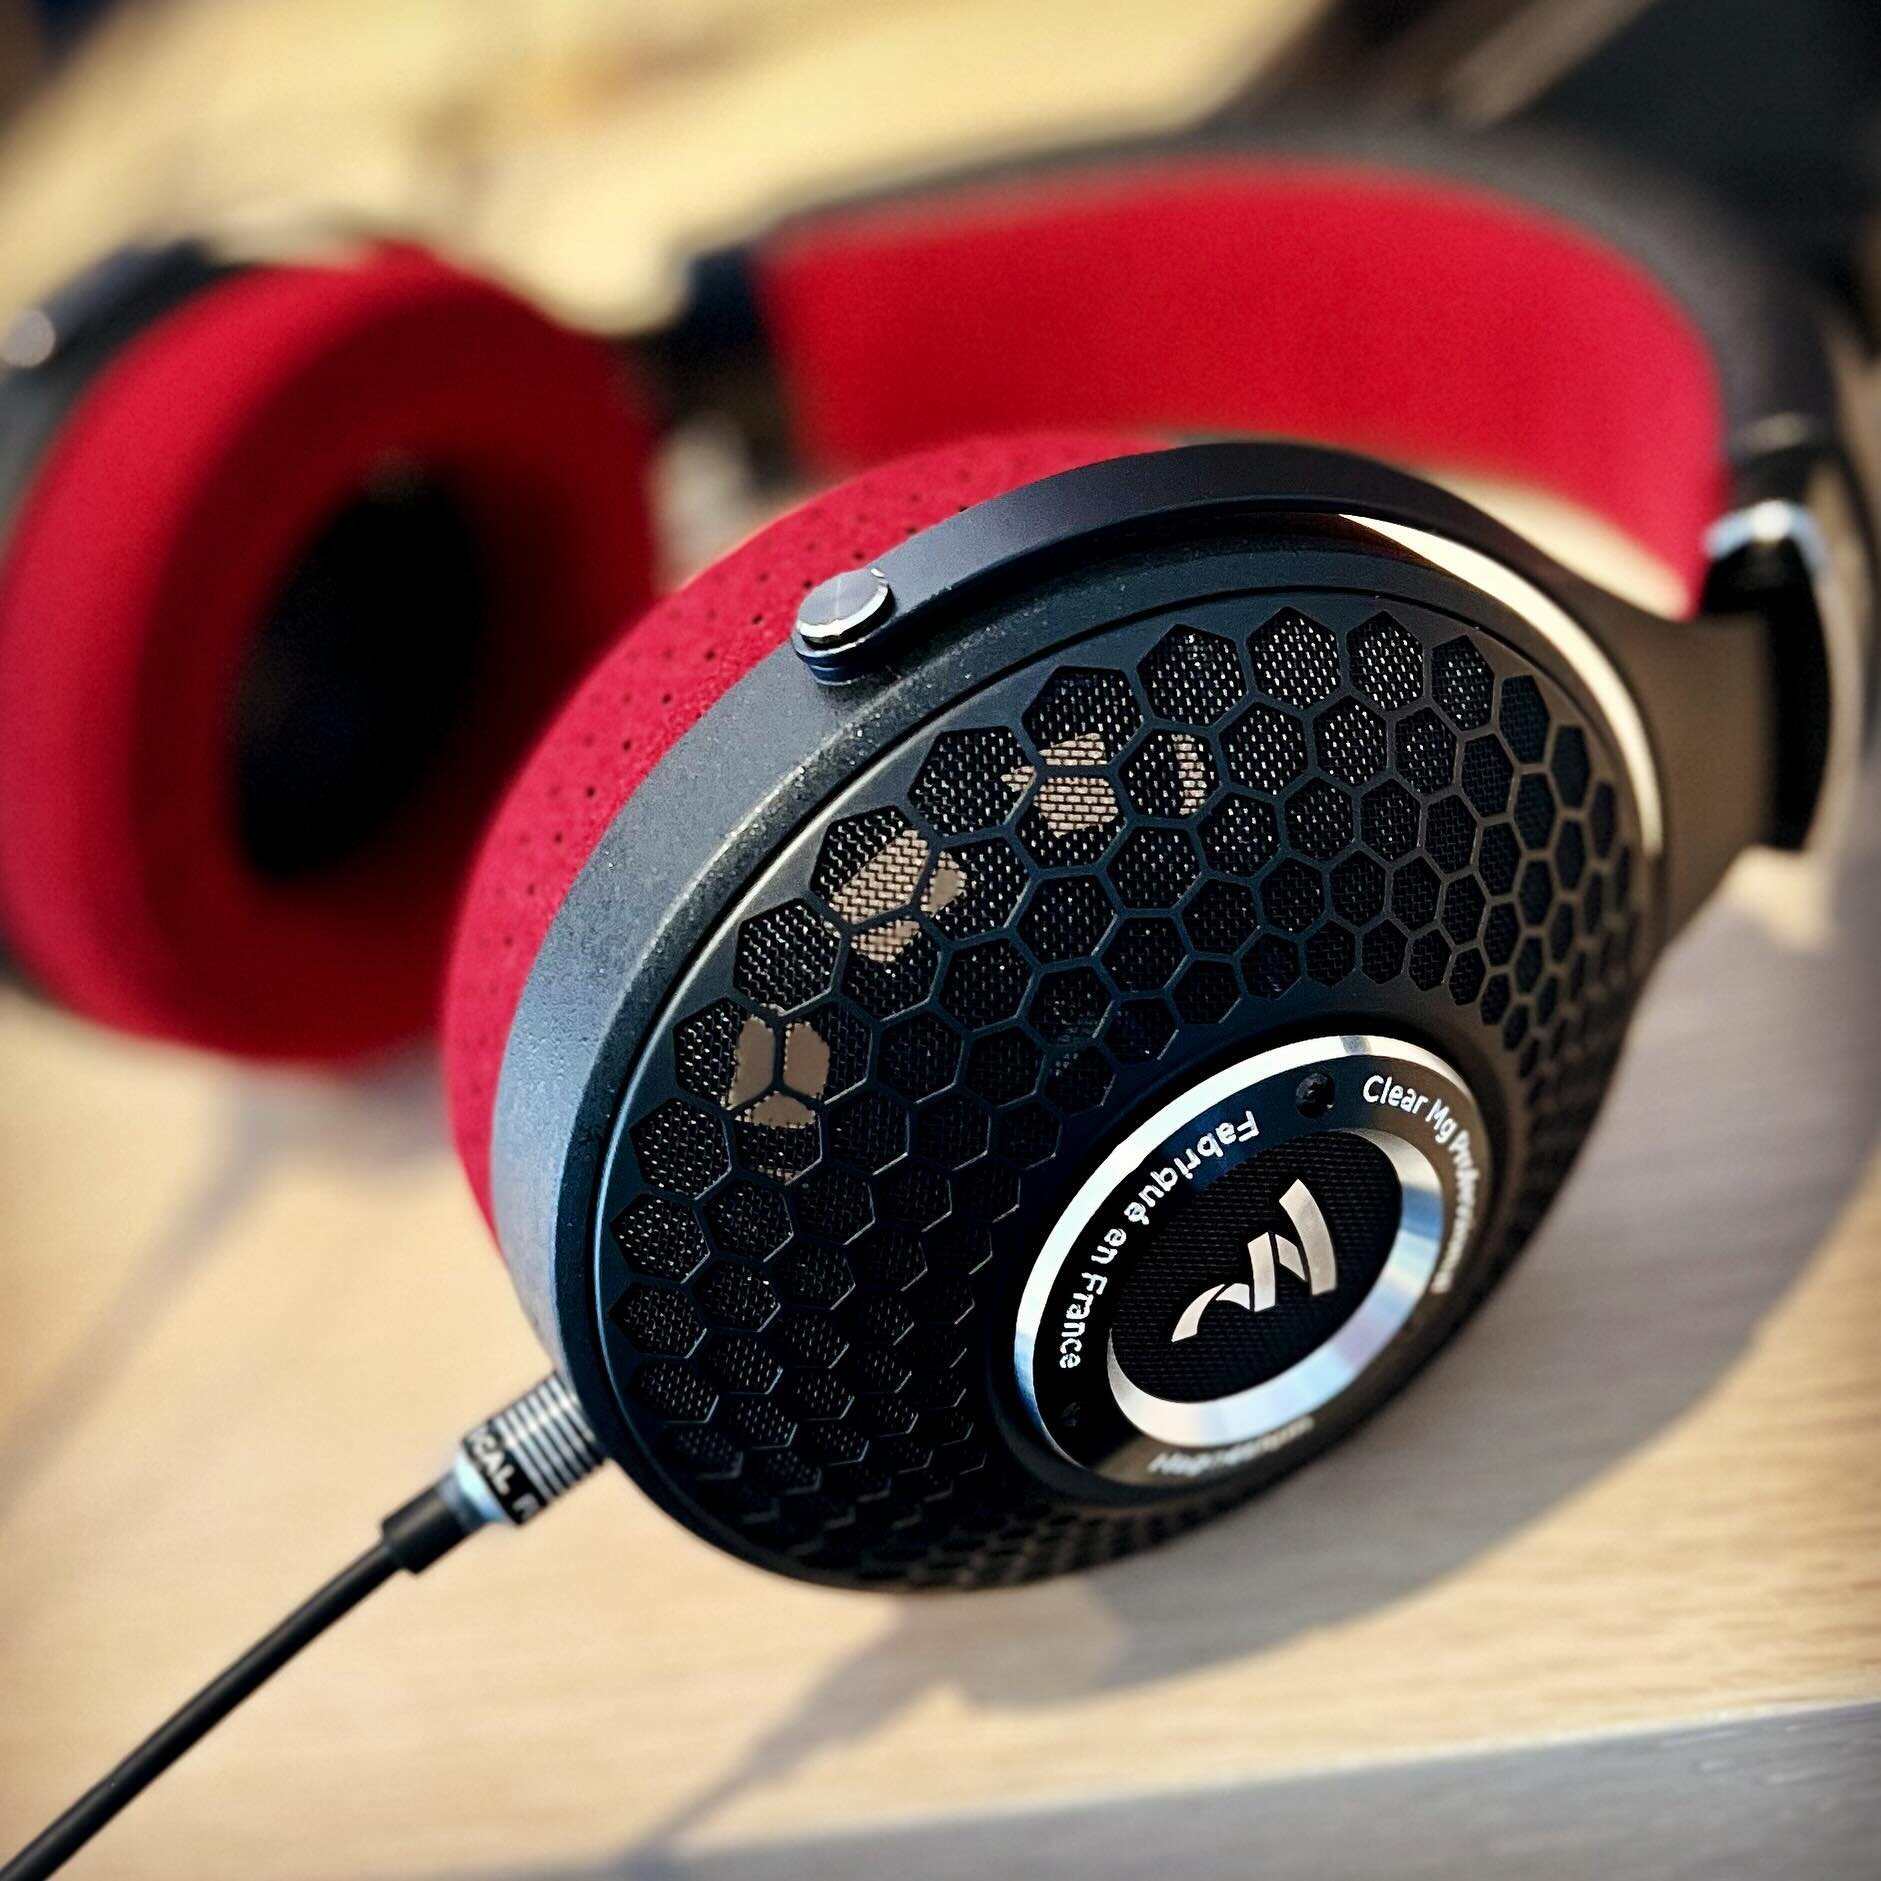 &ldquo;I&rsquo;ve never heard headphones like this before!!&rdquo; - new visitor to Creative Audio, five minutes ago. ☺️
 
Pictured: Focal Clear Mg Pro
 
#headphones #headfi #focal #madeinfrance #audio #audiophile #stereo #hifi #hifidelity #highfidel